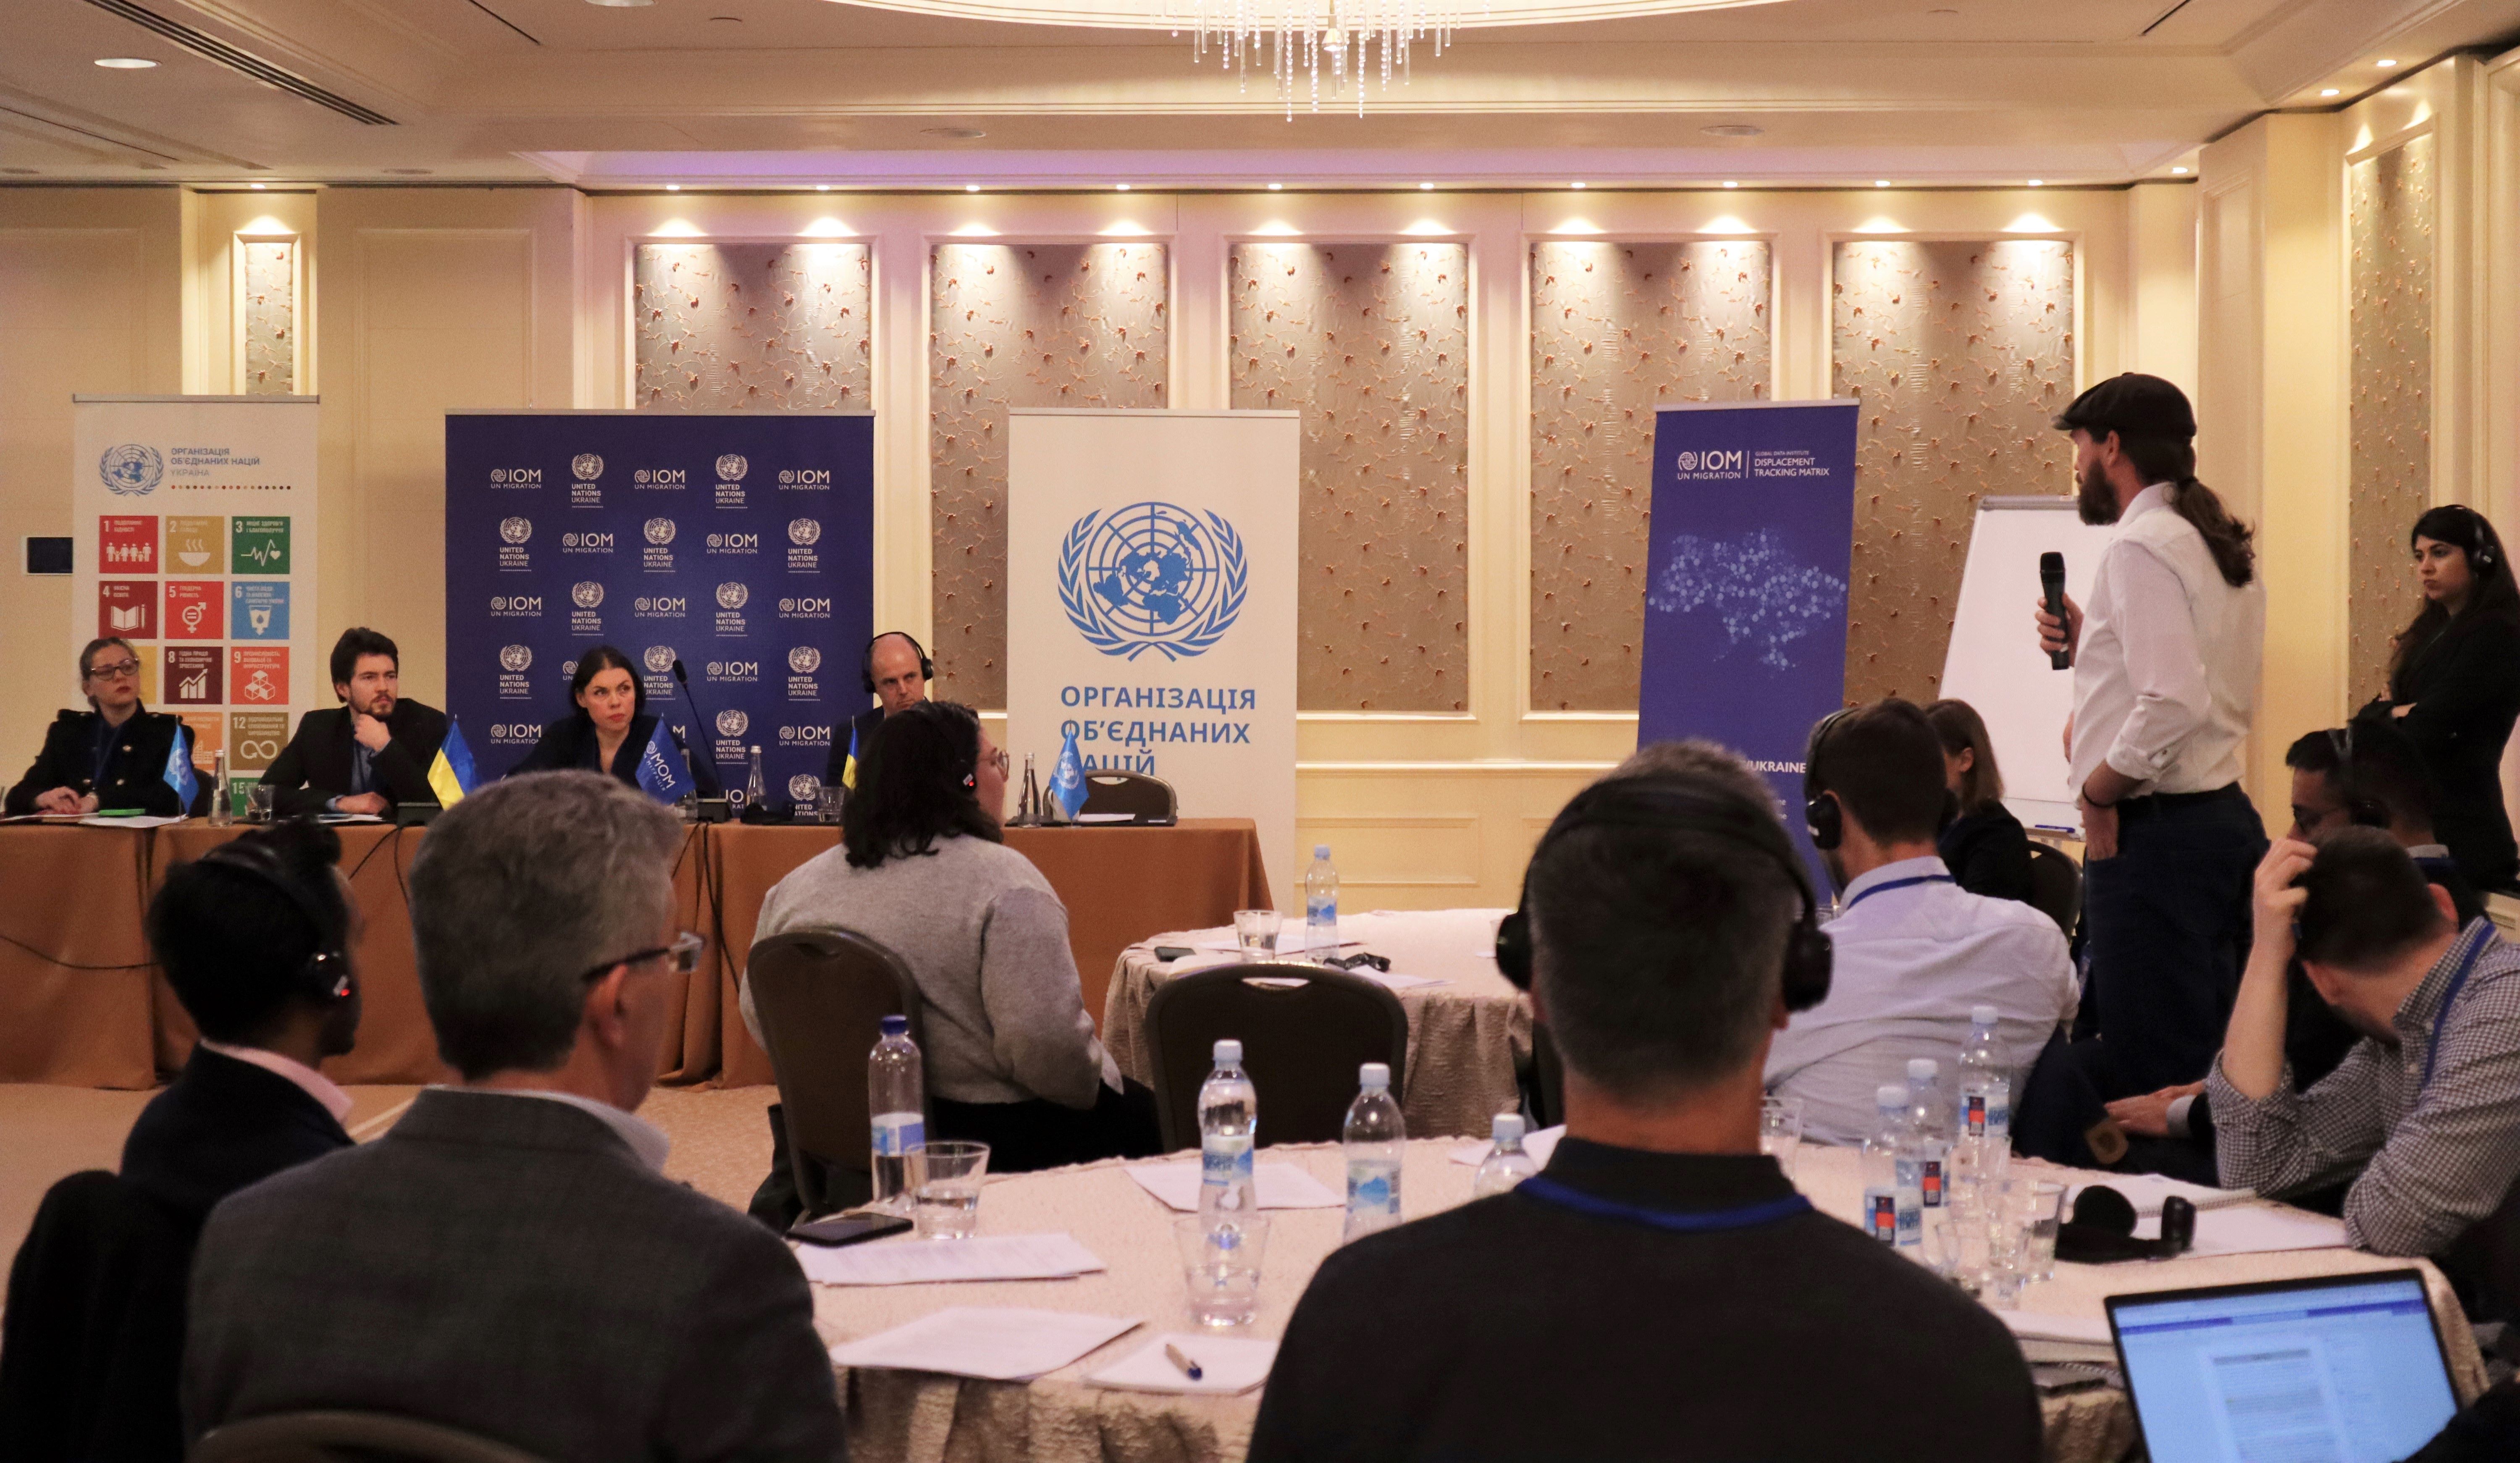 Under the leadership of the UN Resident Coordinator’s office and in partnership with the UN Country Team, the International Organization for Migration (IOM) organized a “Data for Solutions in Ukraine” symposium